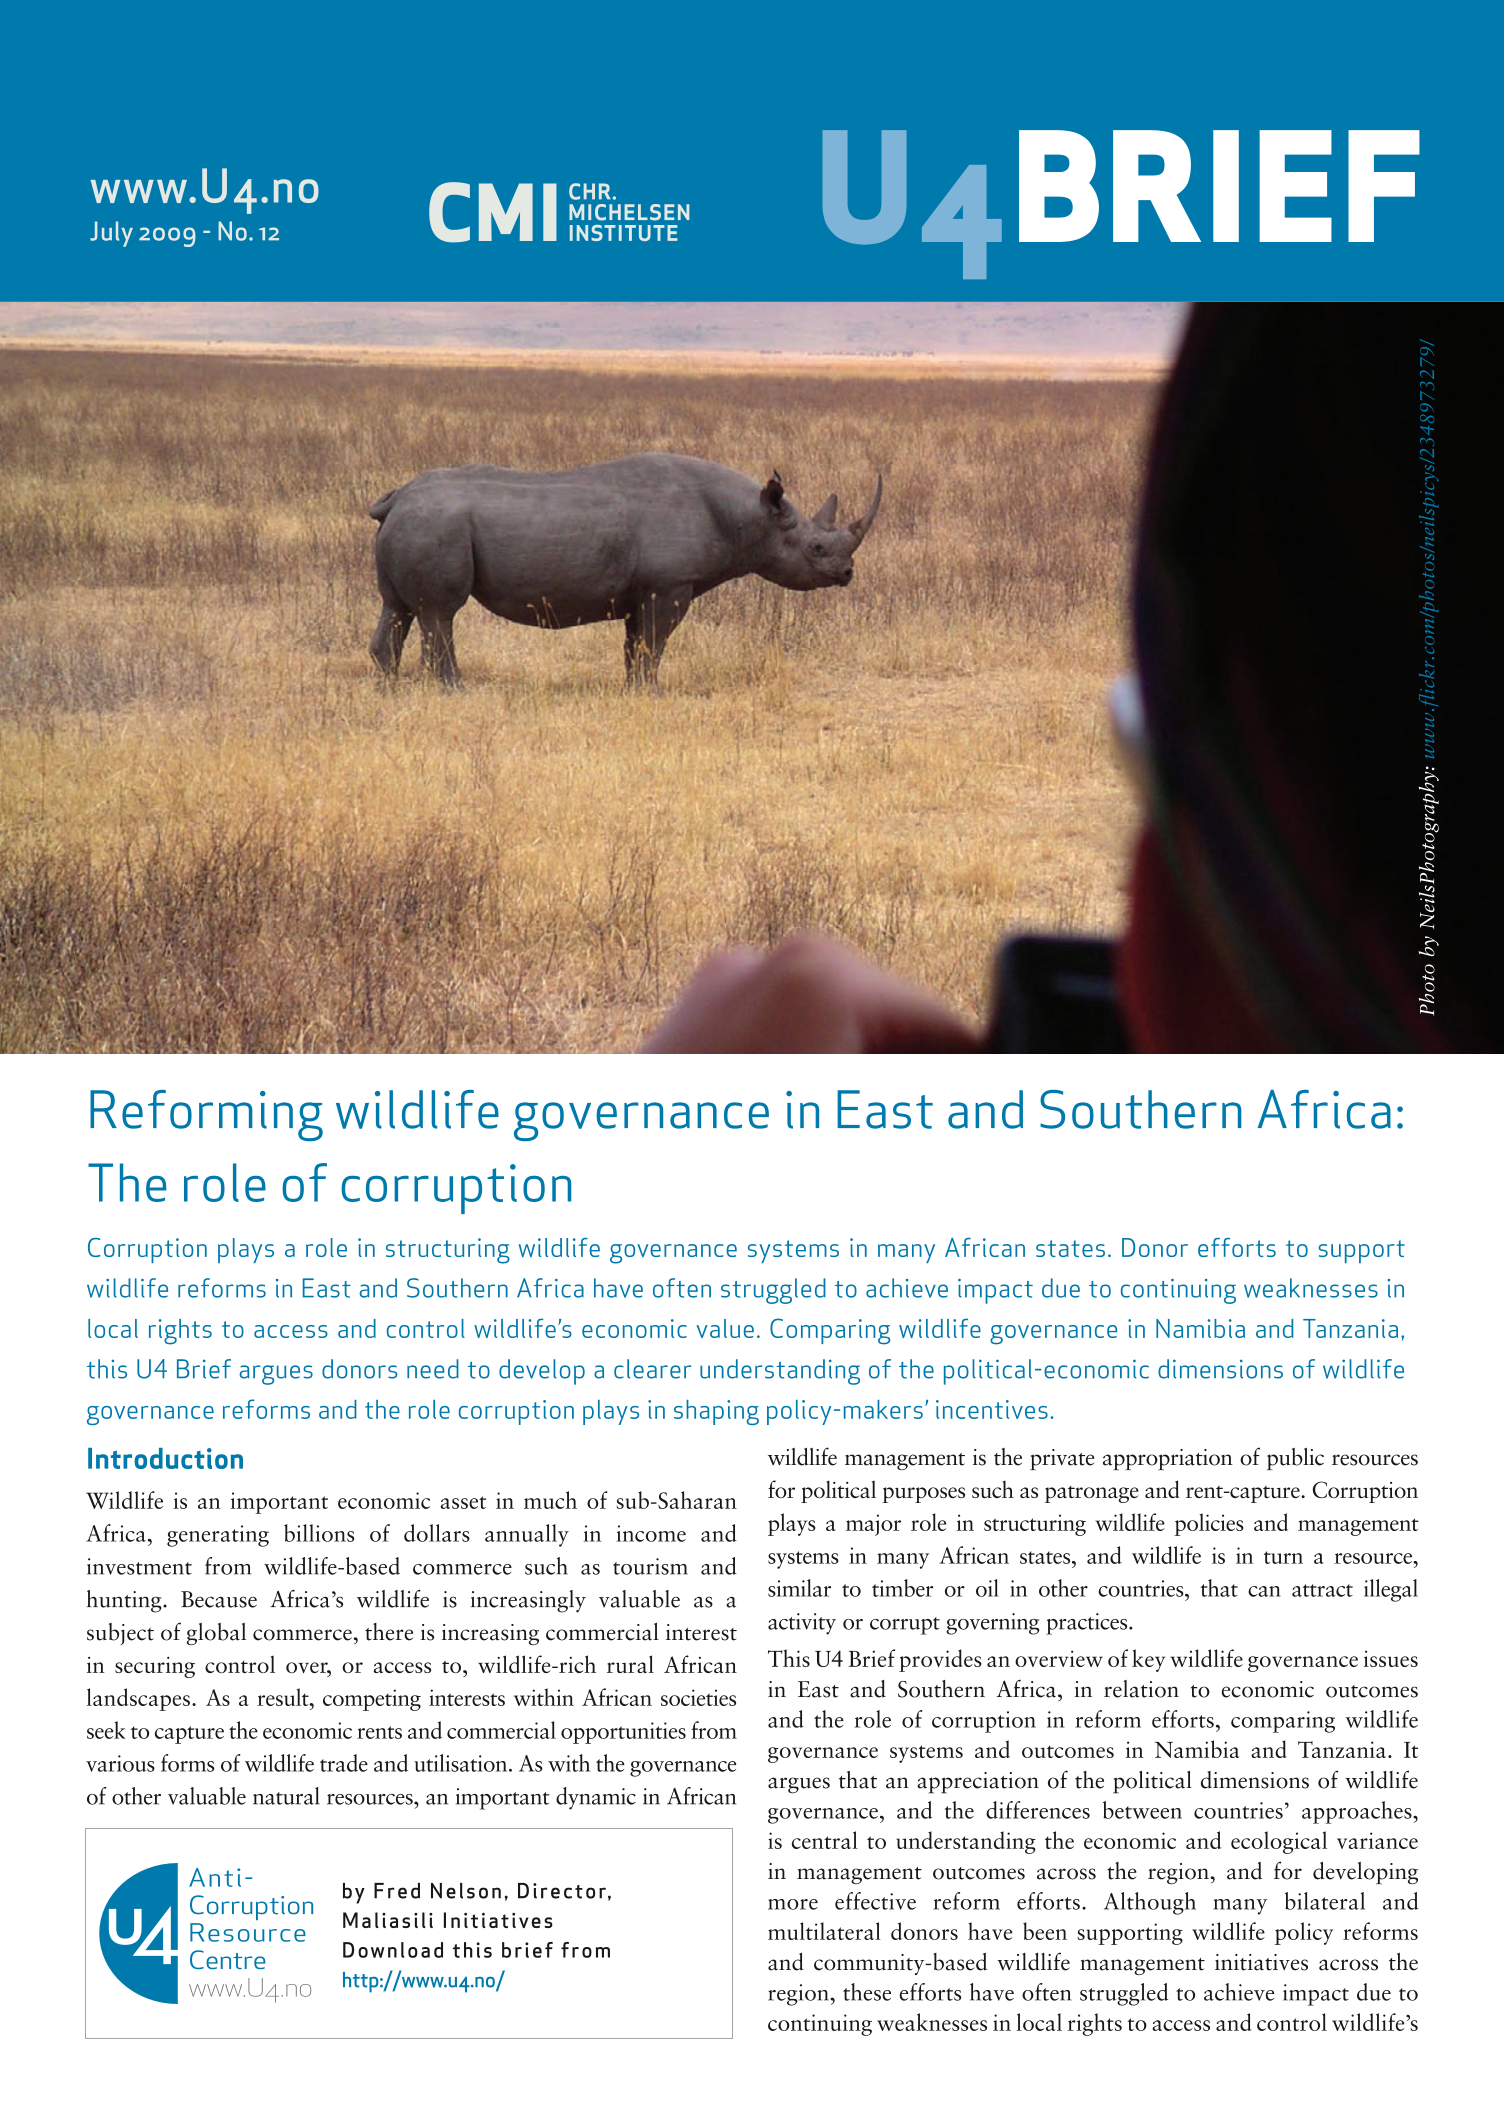 Reforming wildlife governance in East and Southern Africa: The role of corruption